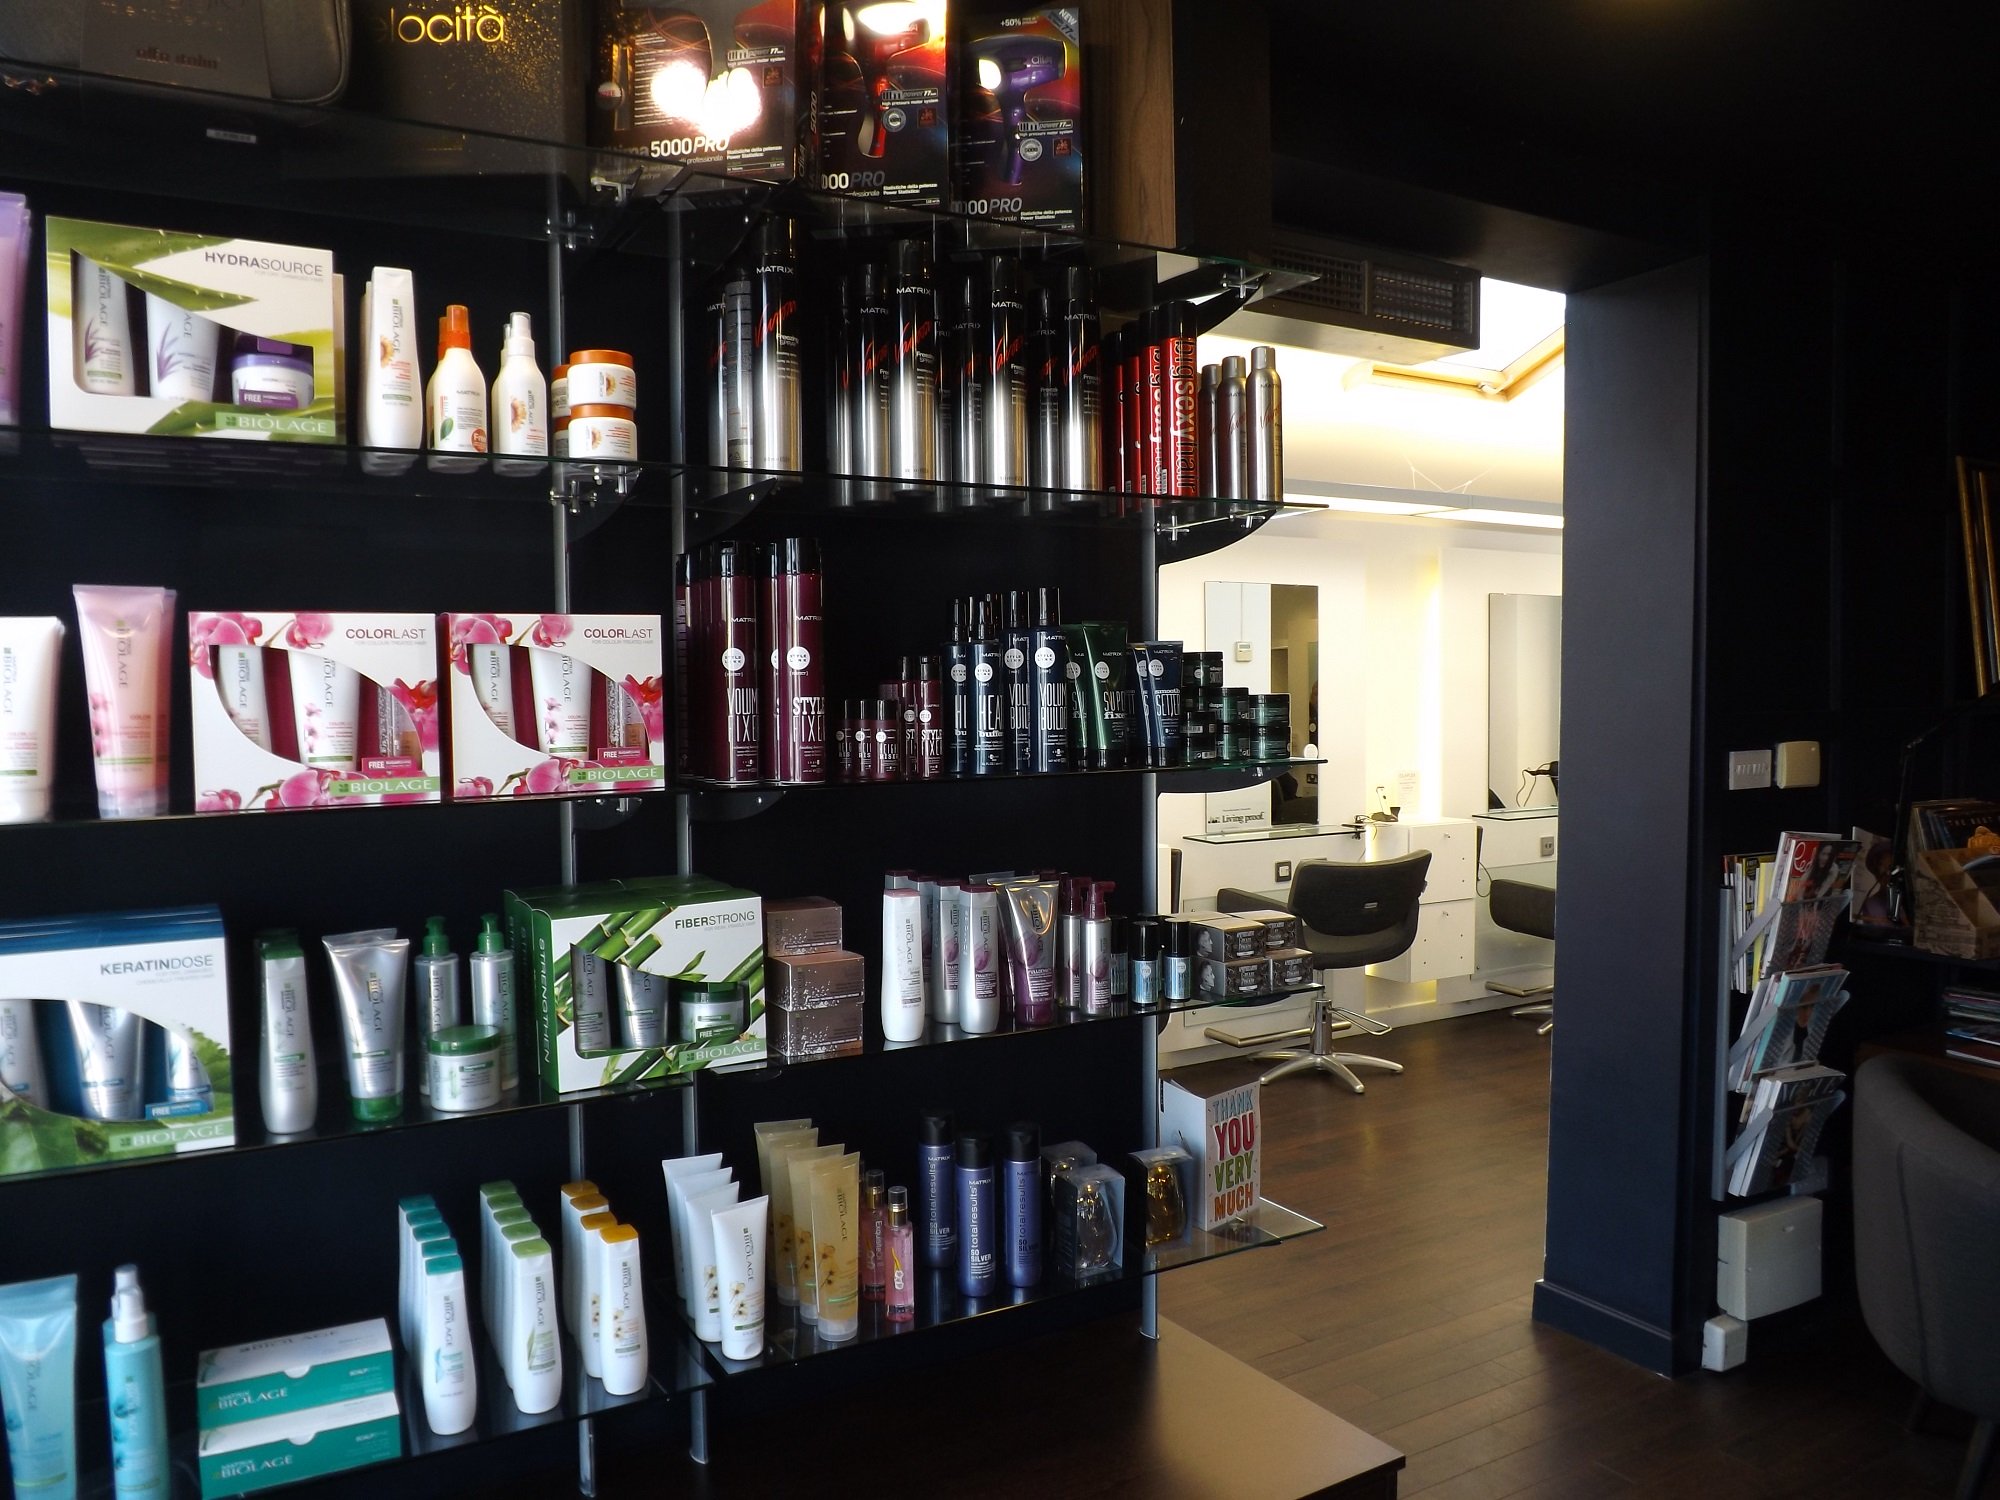 products for sale at bhp hair salon in guiseley leeds